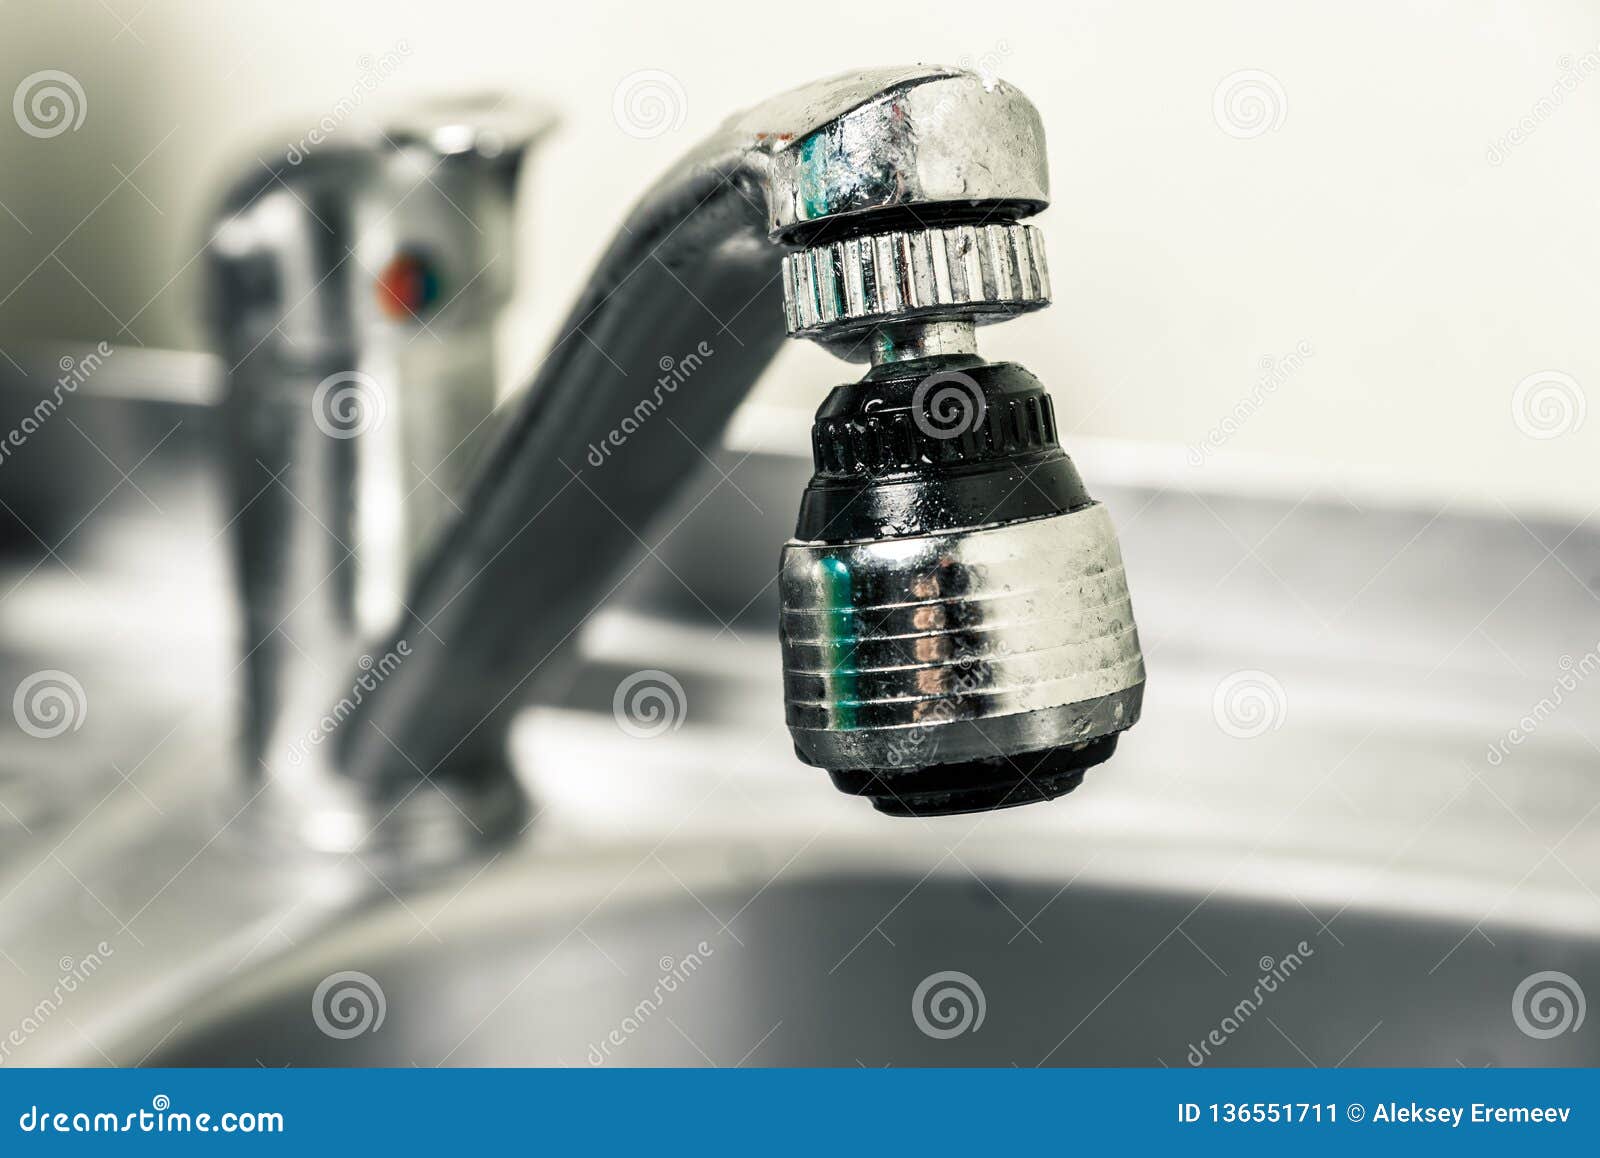 Clean Sink With Faucet Stock Image Image Of Inset Interior